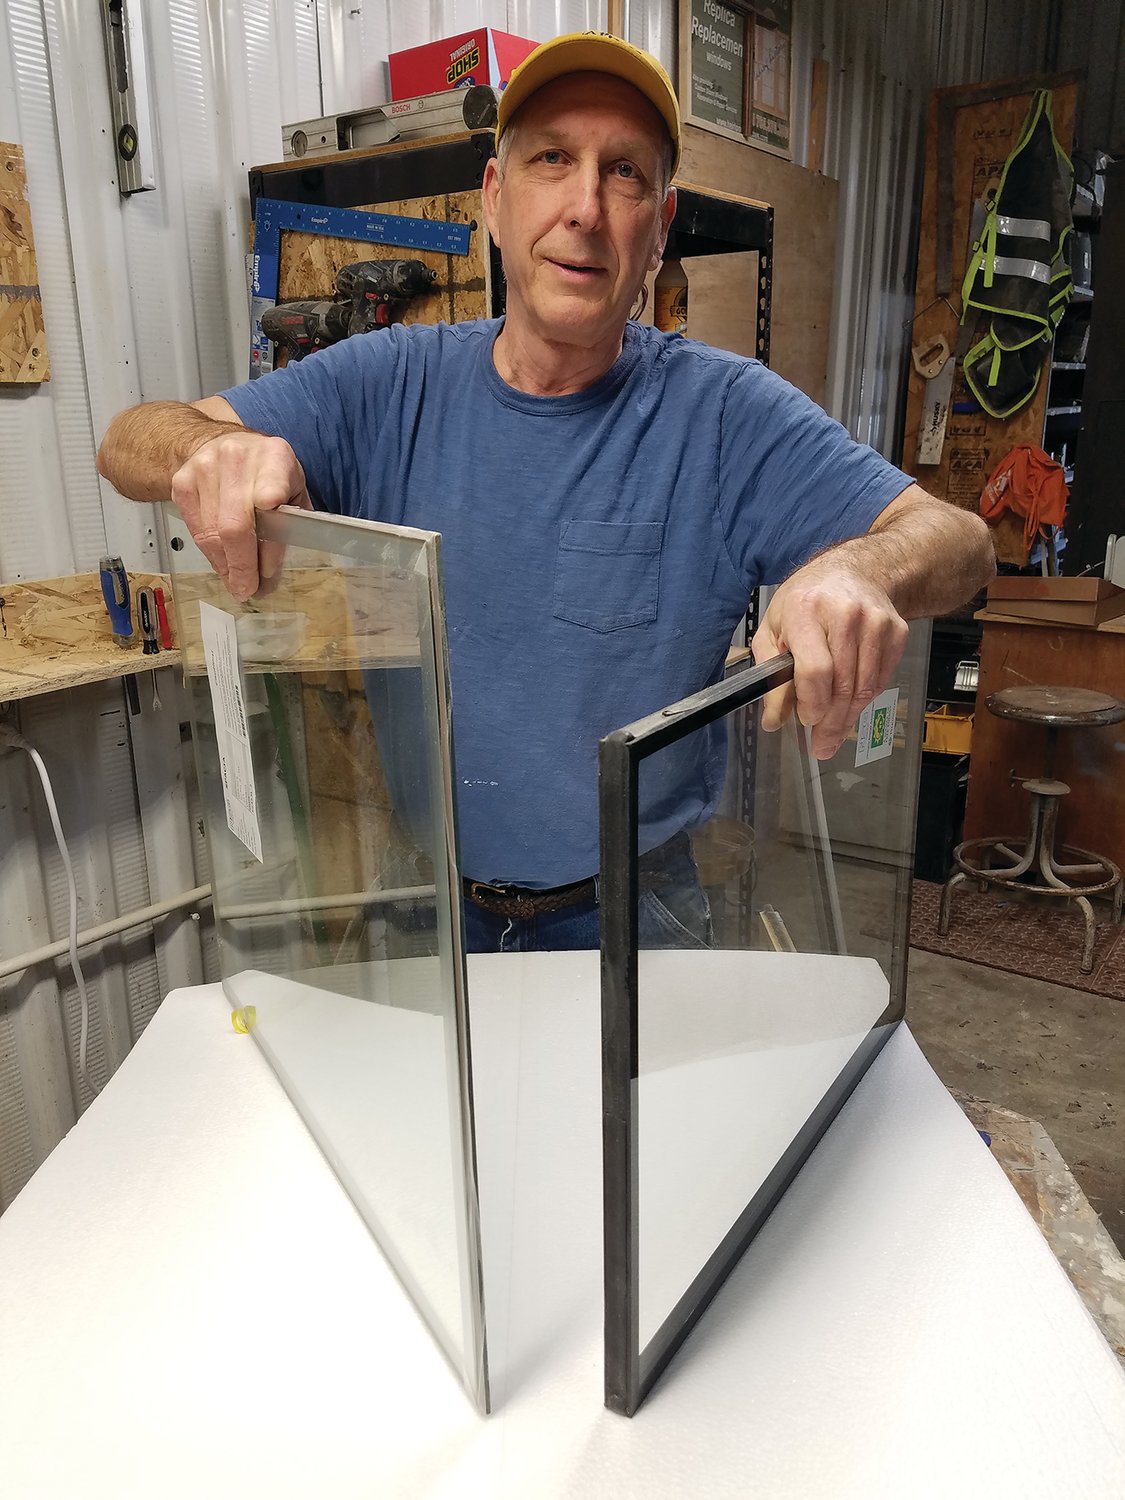 Bill Hepburn of Heirloom Windows is holding two pieces of insulated glass to show the differences.  The one on the left is vacuum insulated glass (VIG) and is 1/4